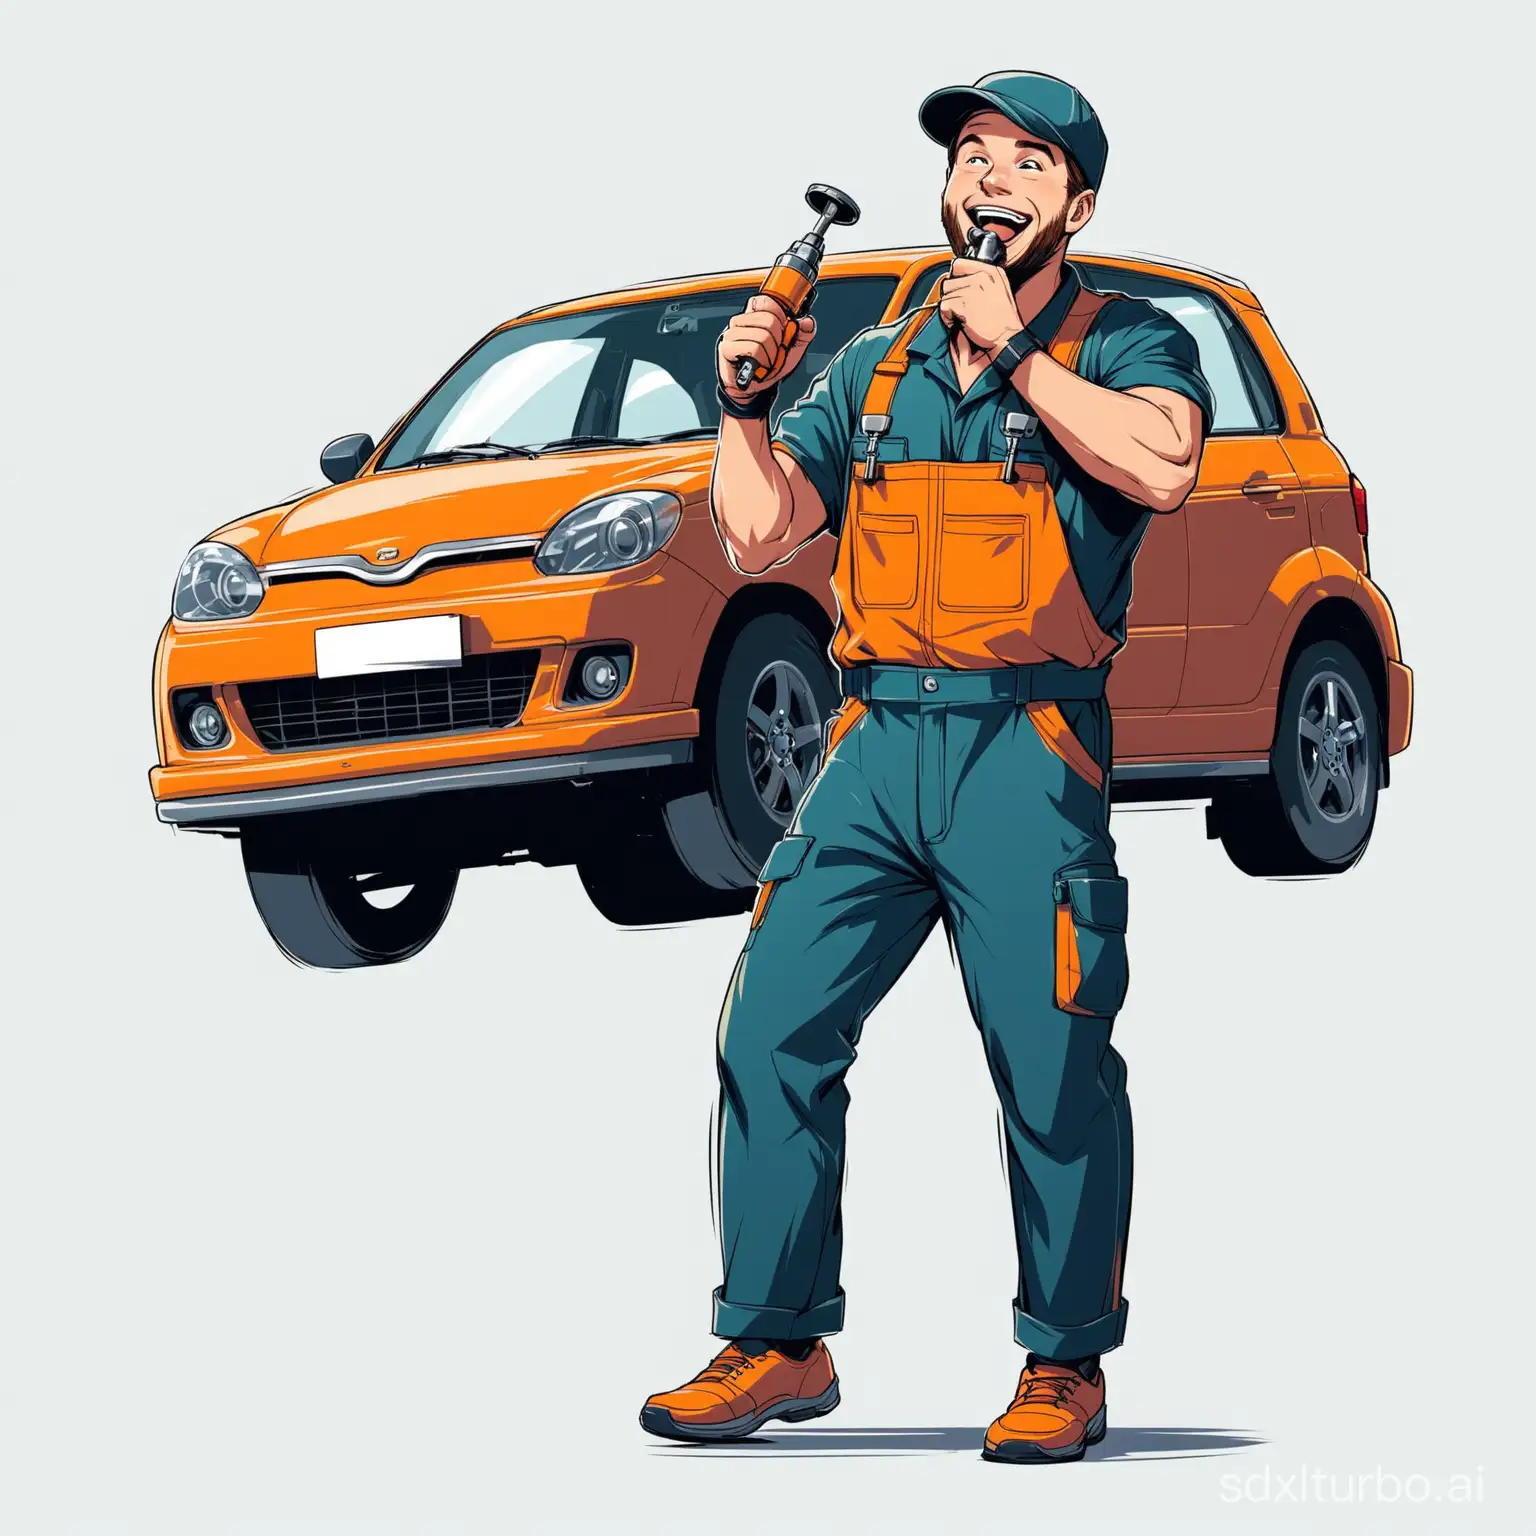 A cheerful car mechanic, a man in full height, runs and holds one mouthpiece, calls for purchase on a white background